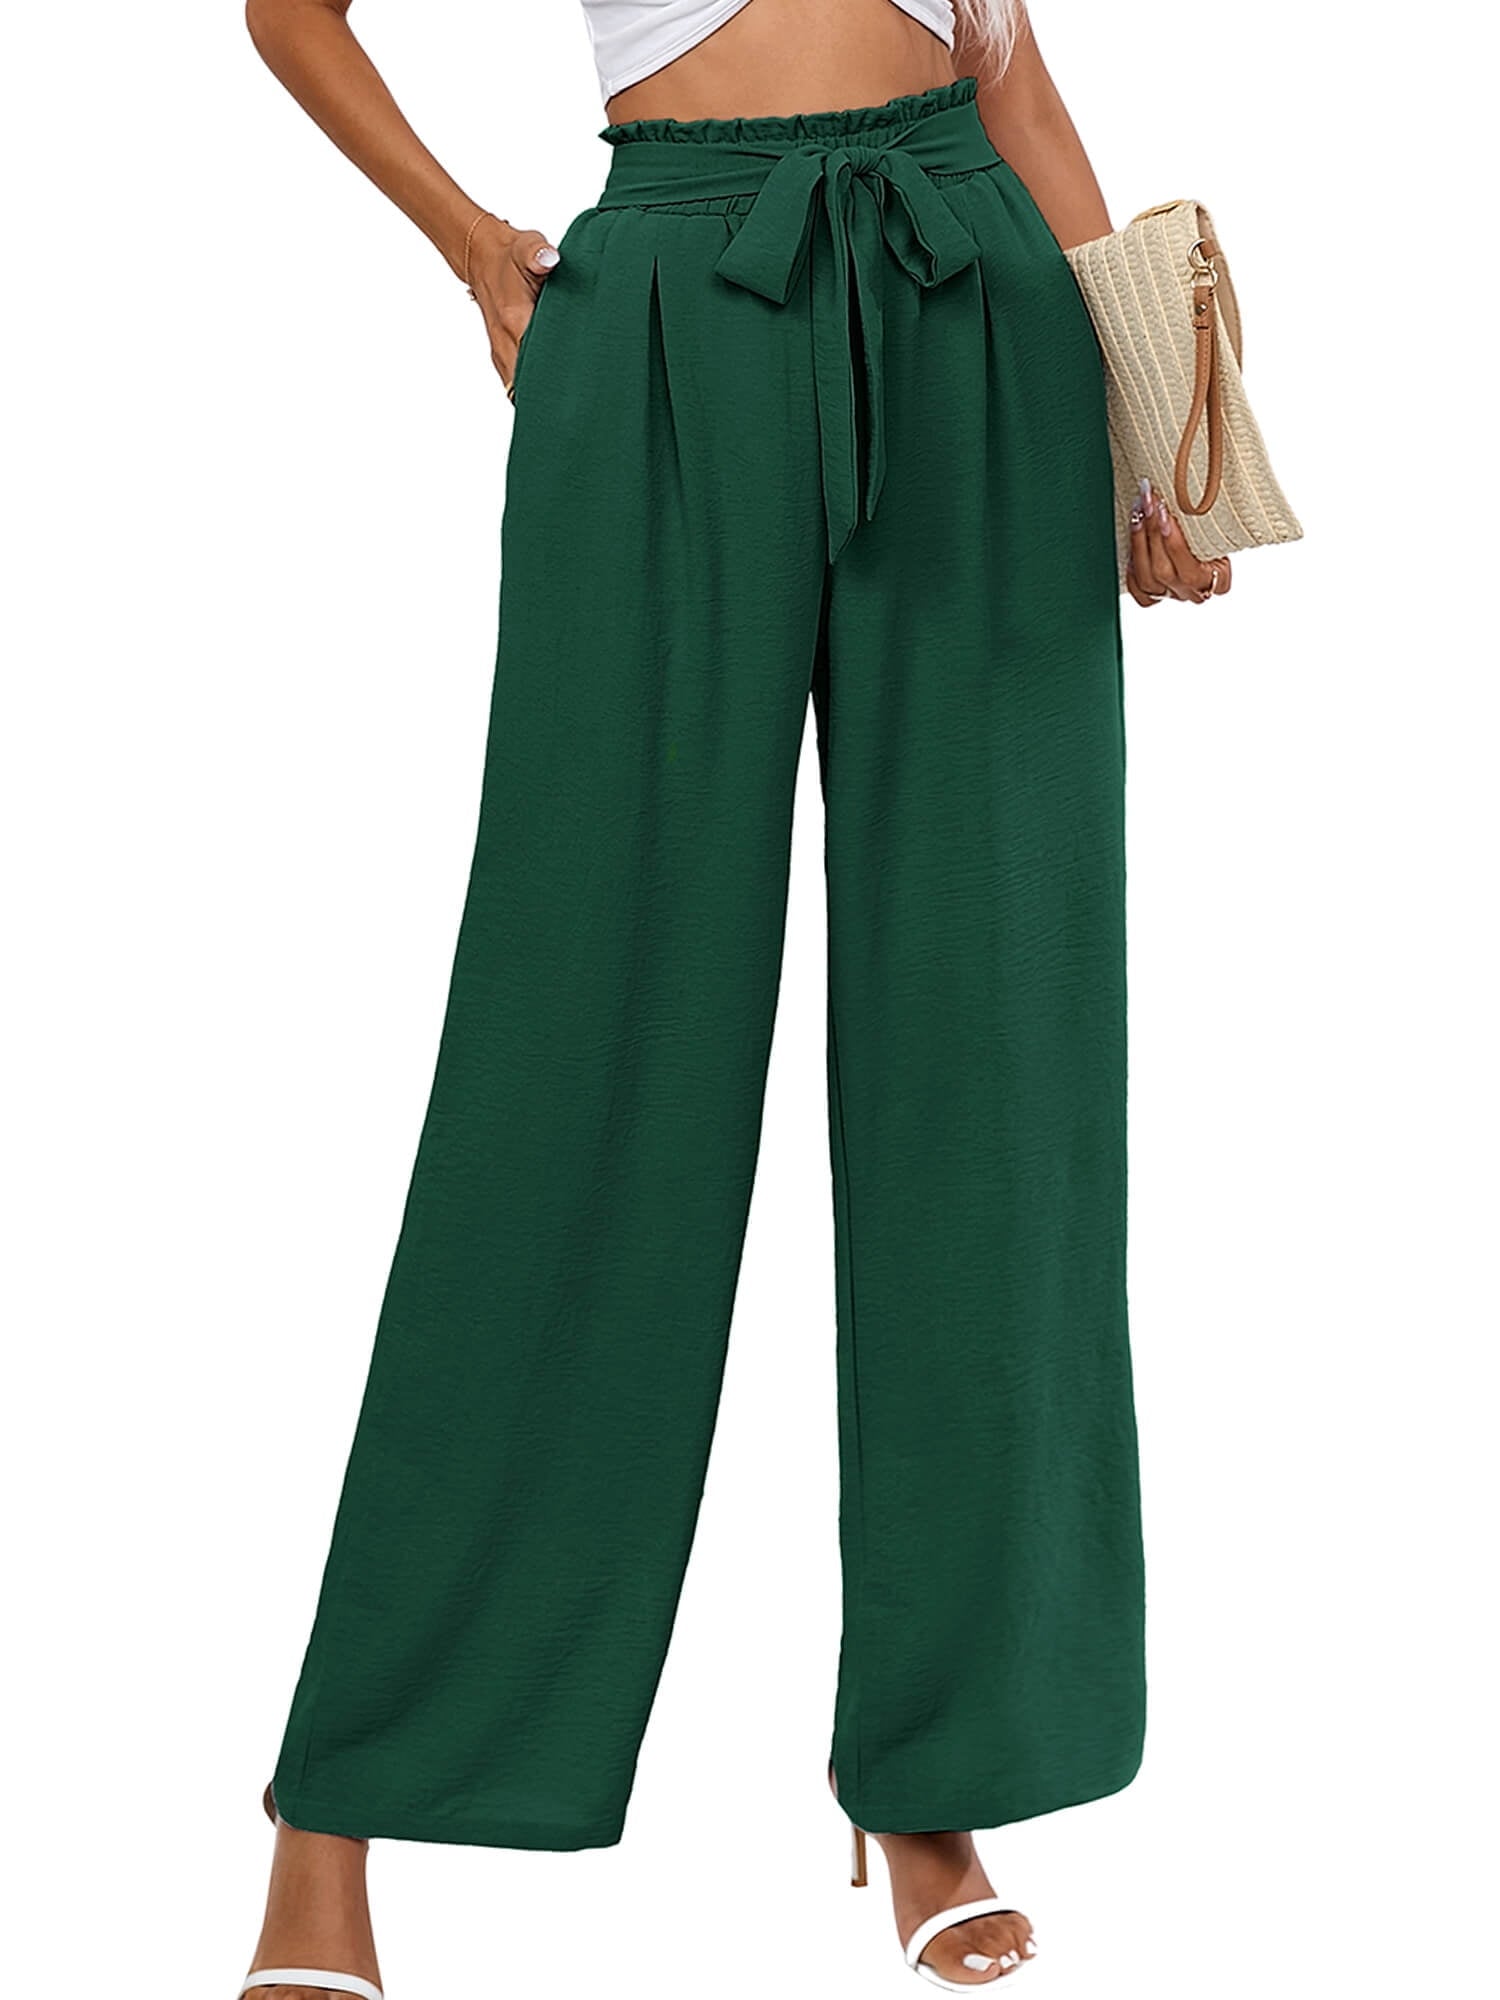 Buy Solid Palazzo Pants with Pockets and Tie-Ups